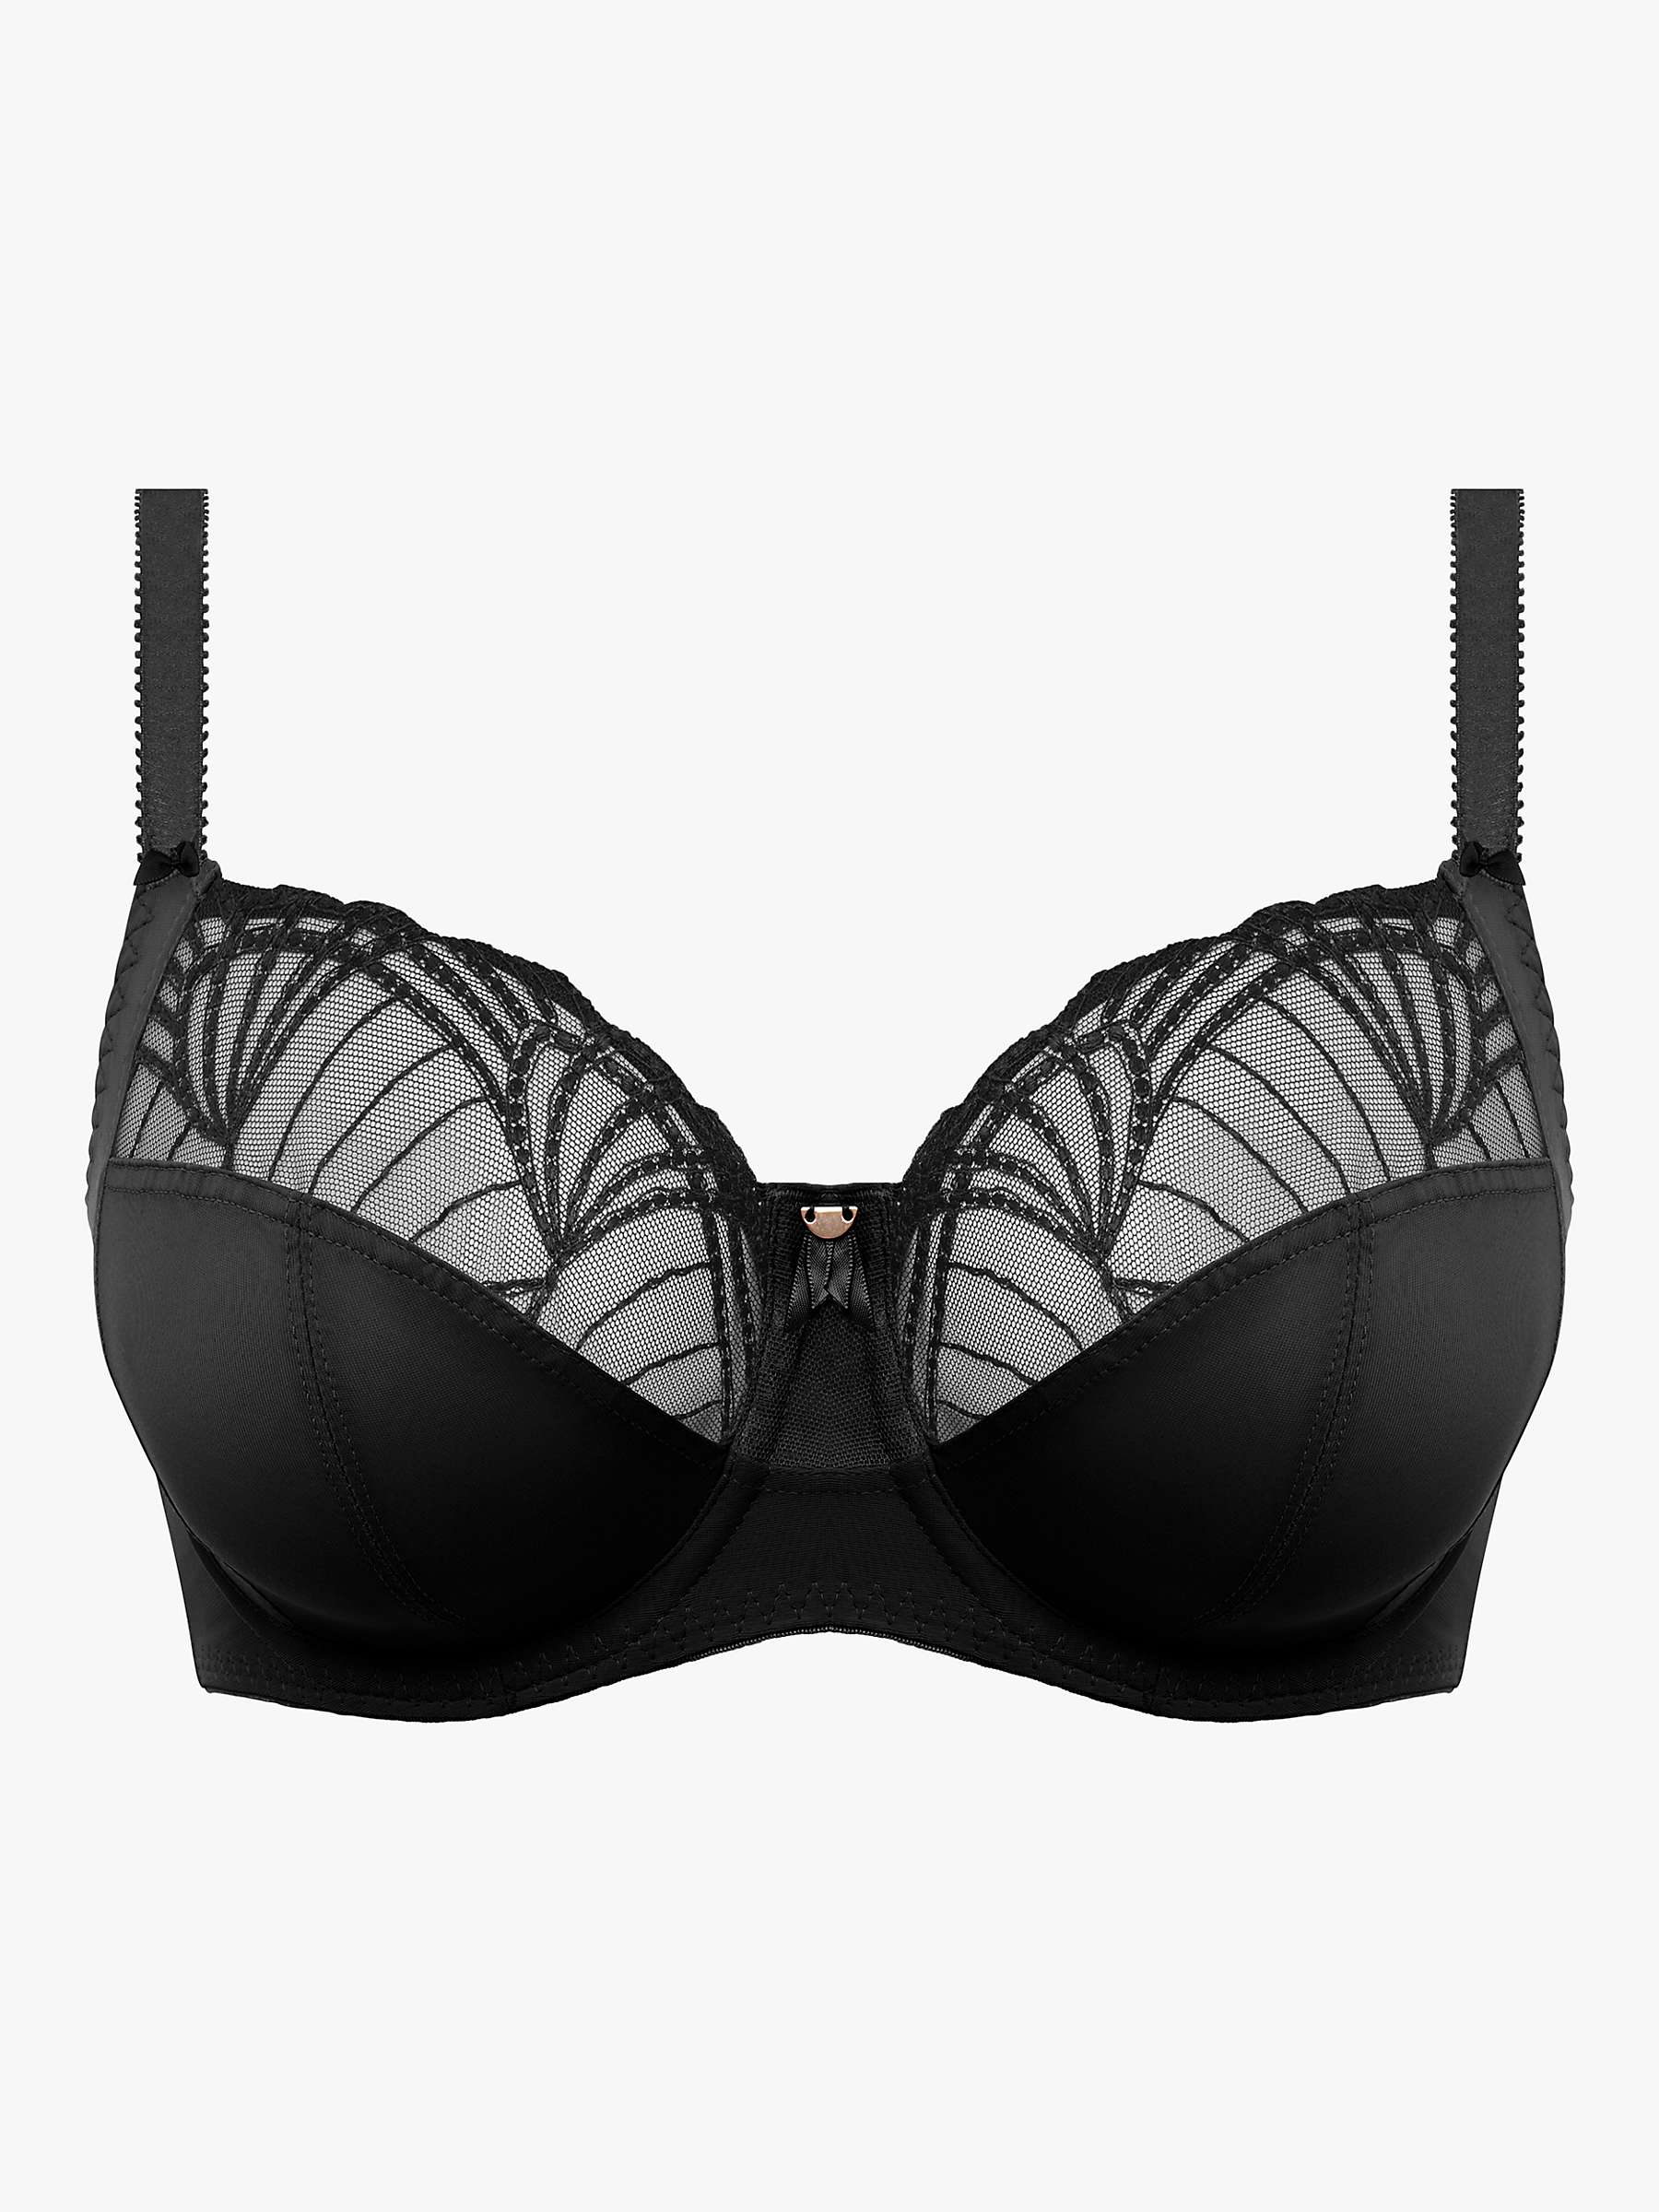 Buy Fantasie Adelle Underwired Side Support Full Cup Bra Online at johnlewis.com